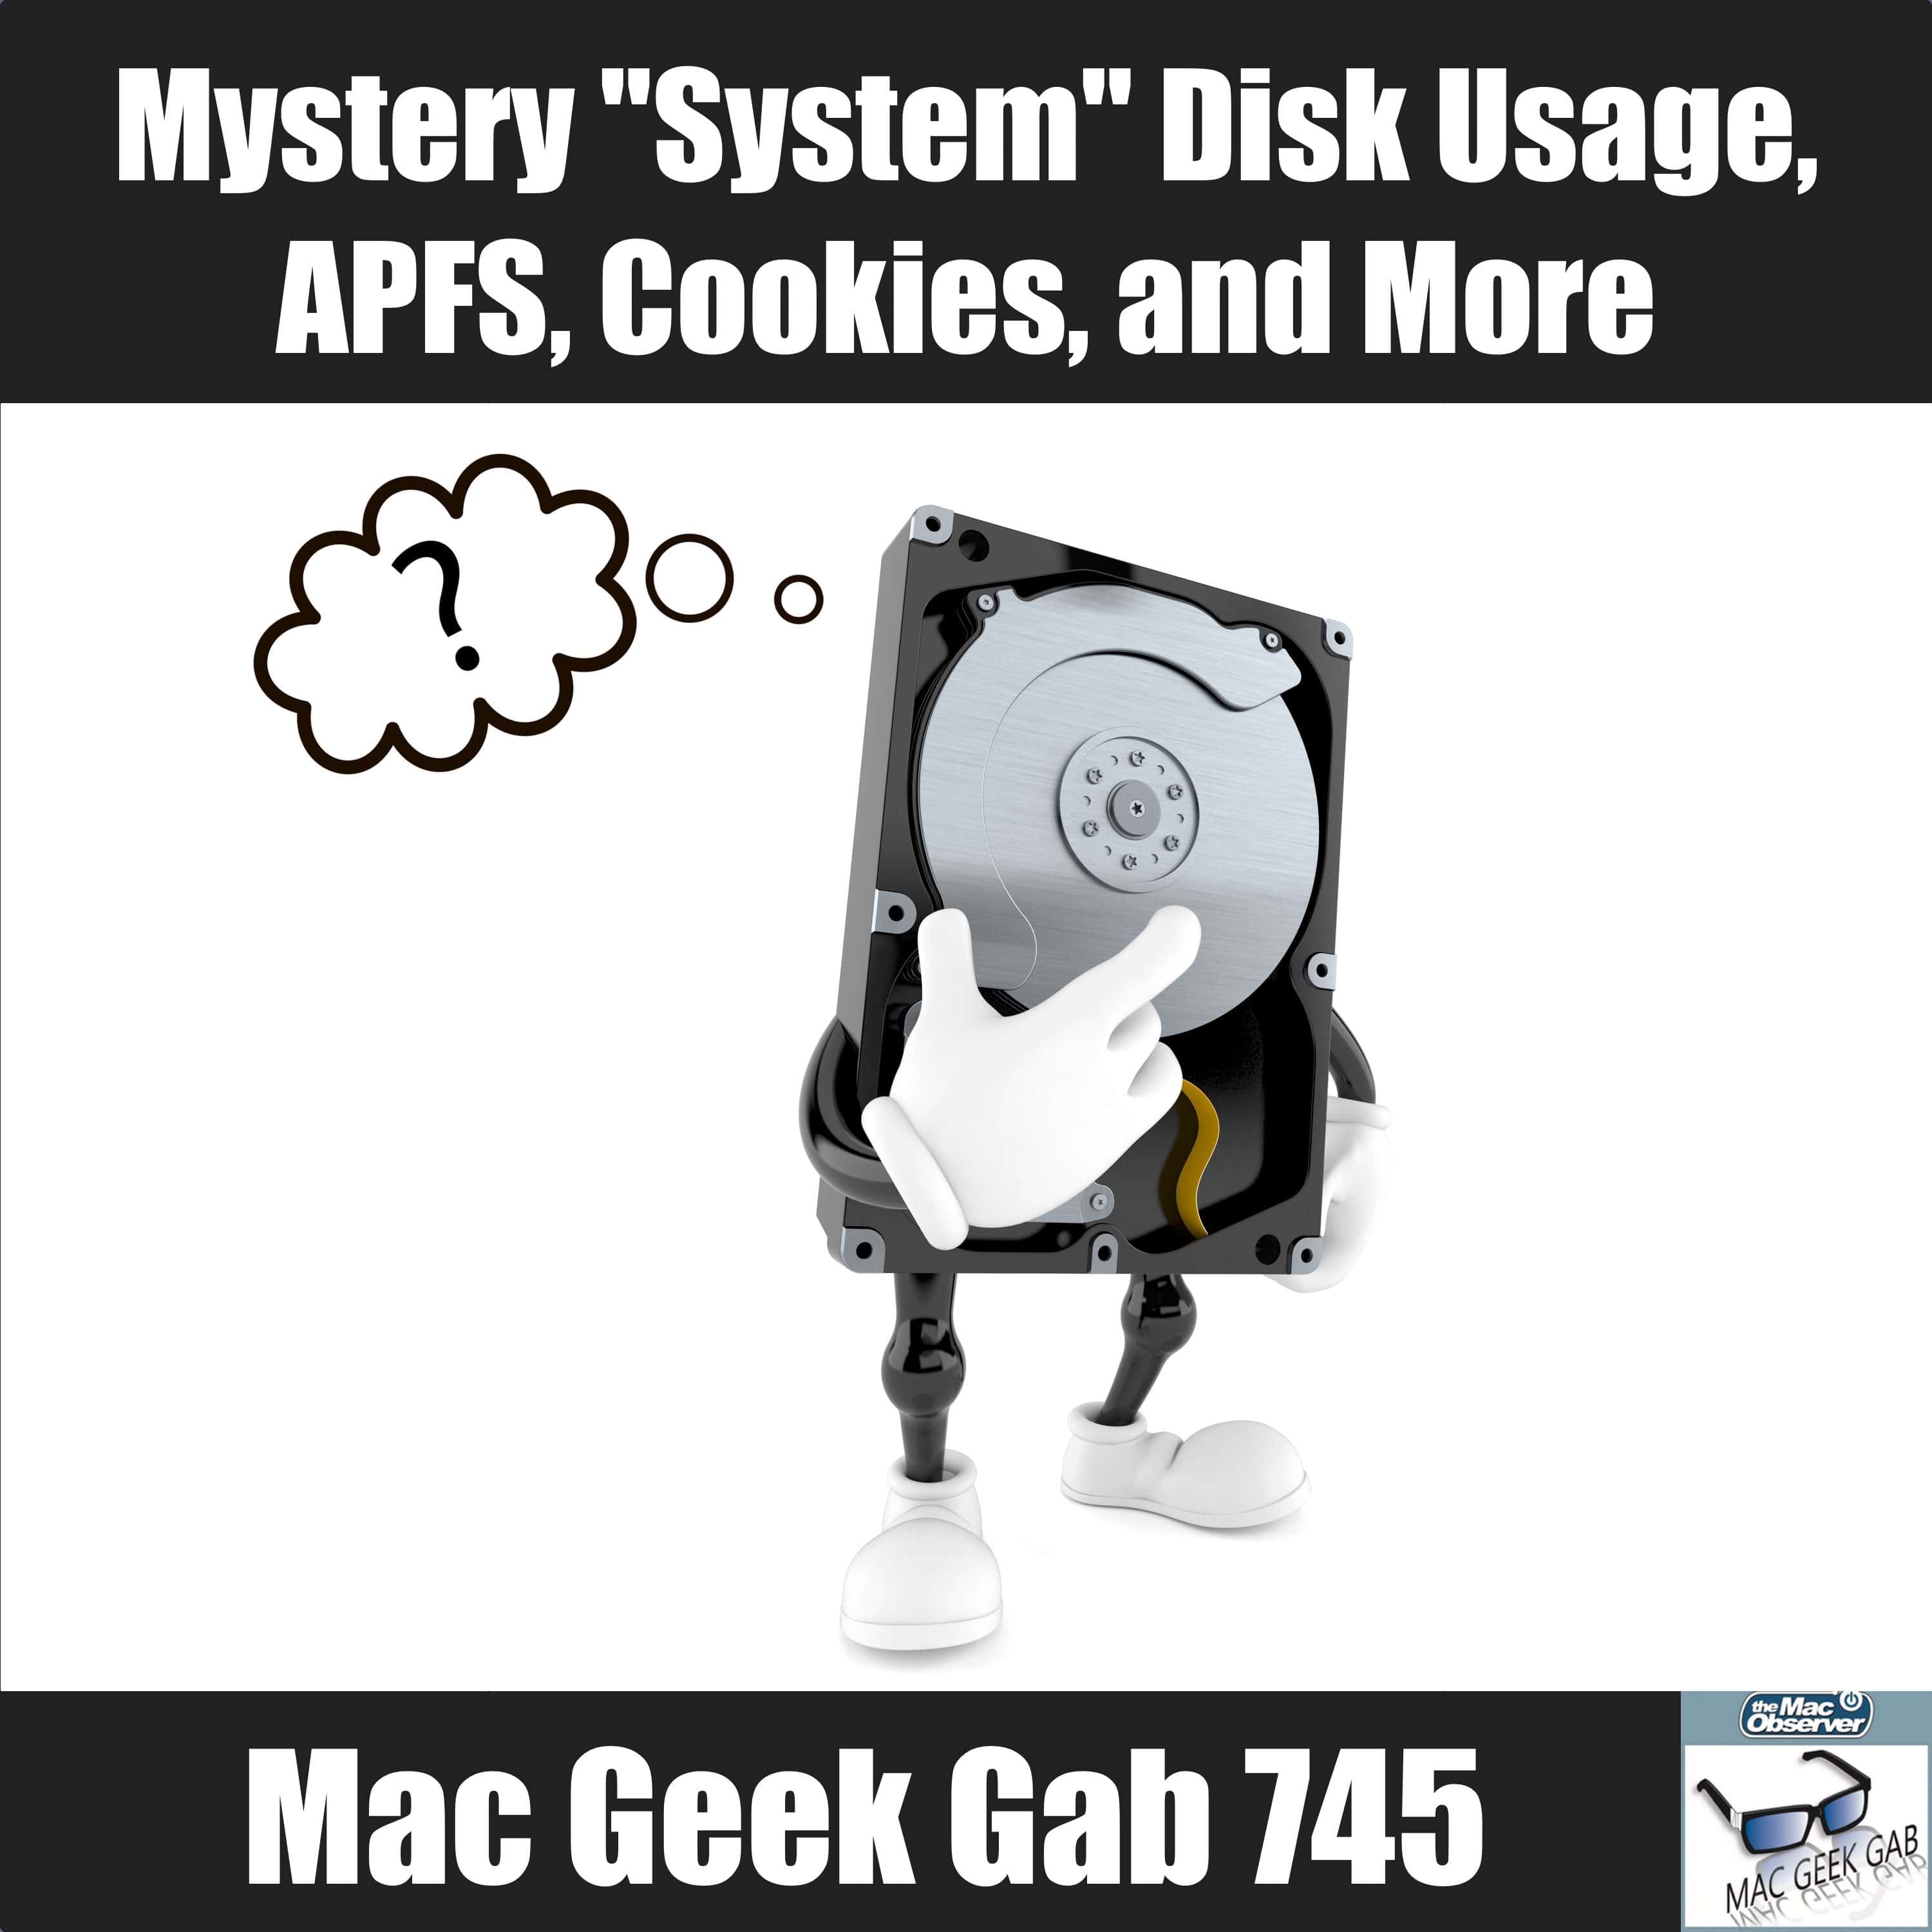 Mystery “System” Disk Usage, APFS, Cookies, and More – Mac Geek Gab 745